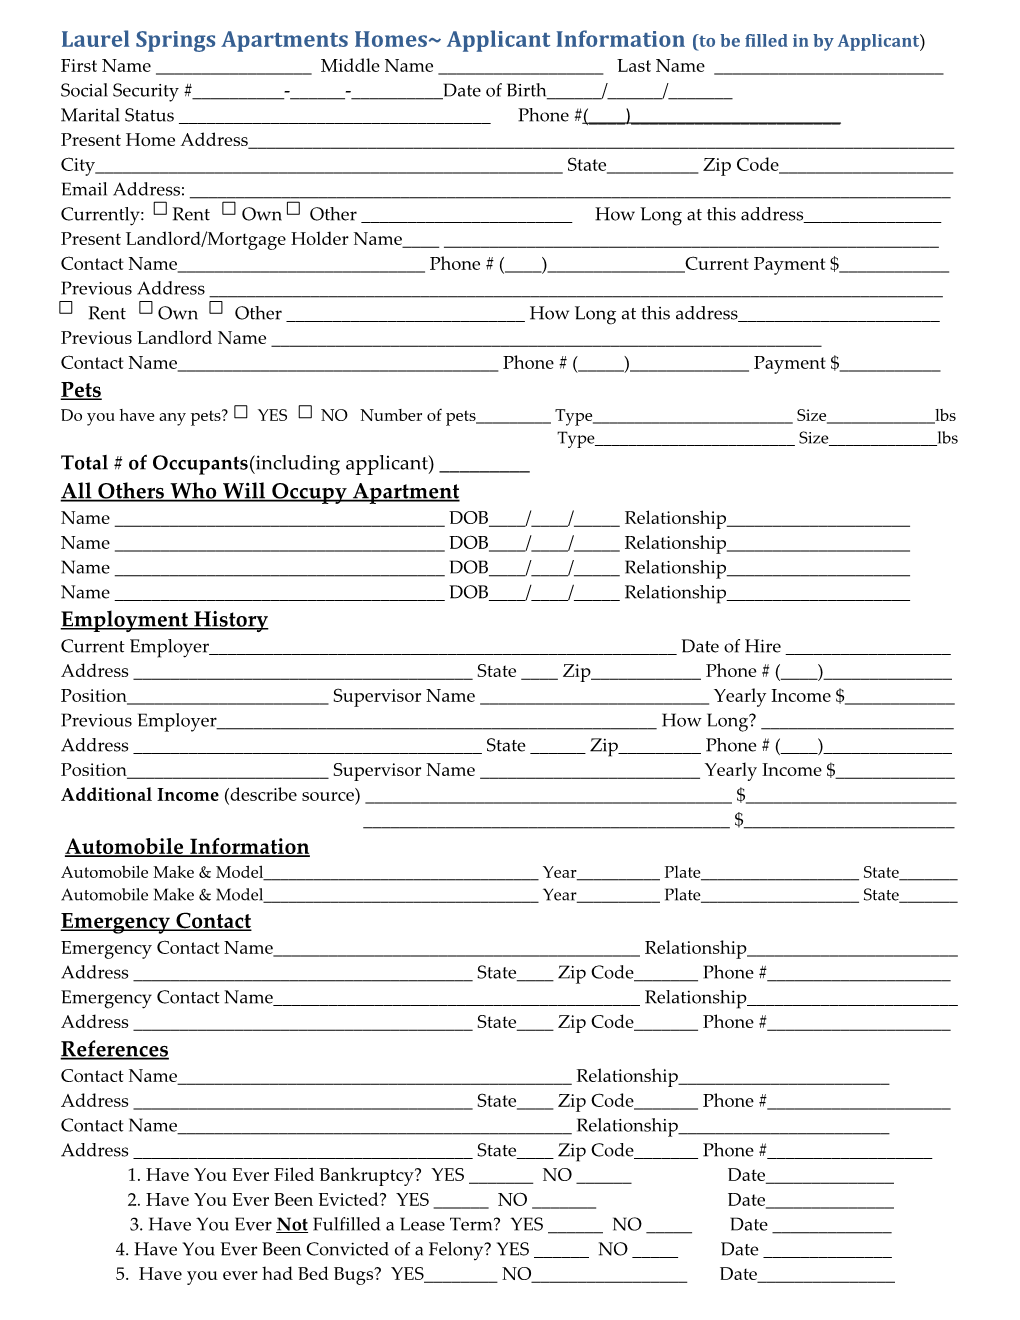 Applicant Information (To Be Filled in by Applicant)